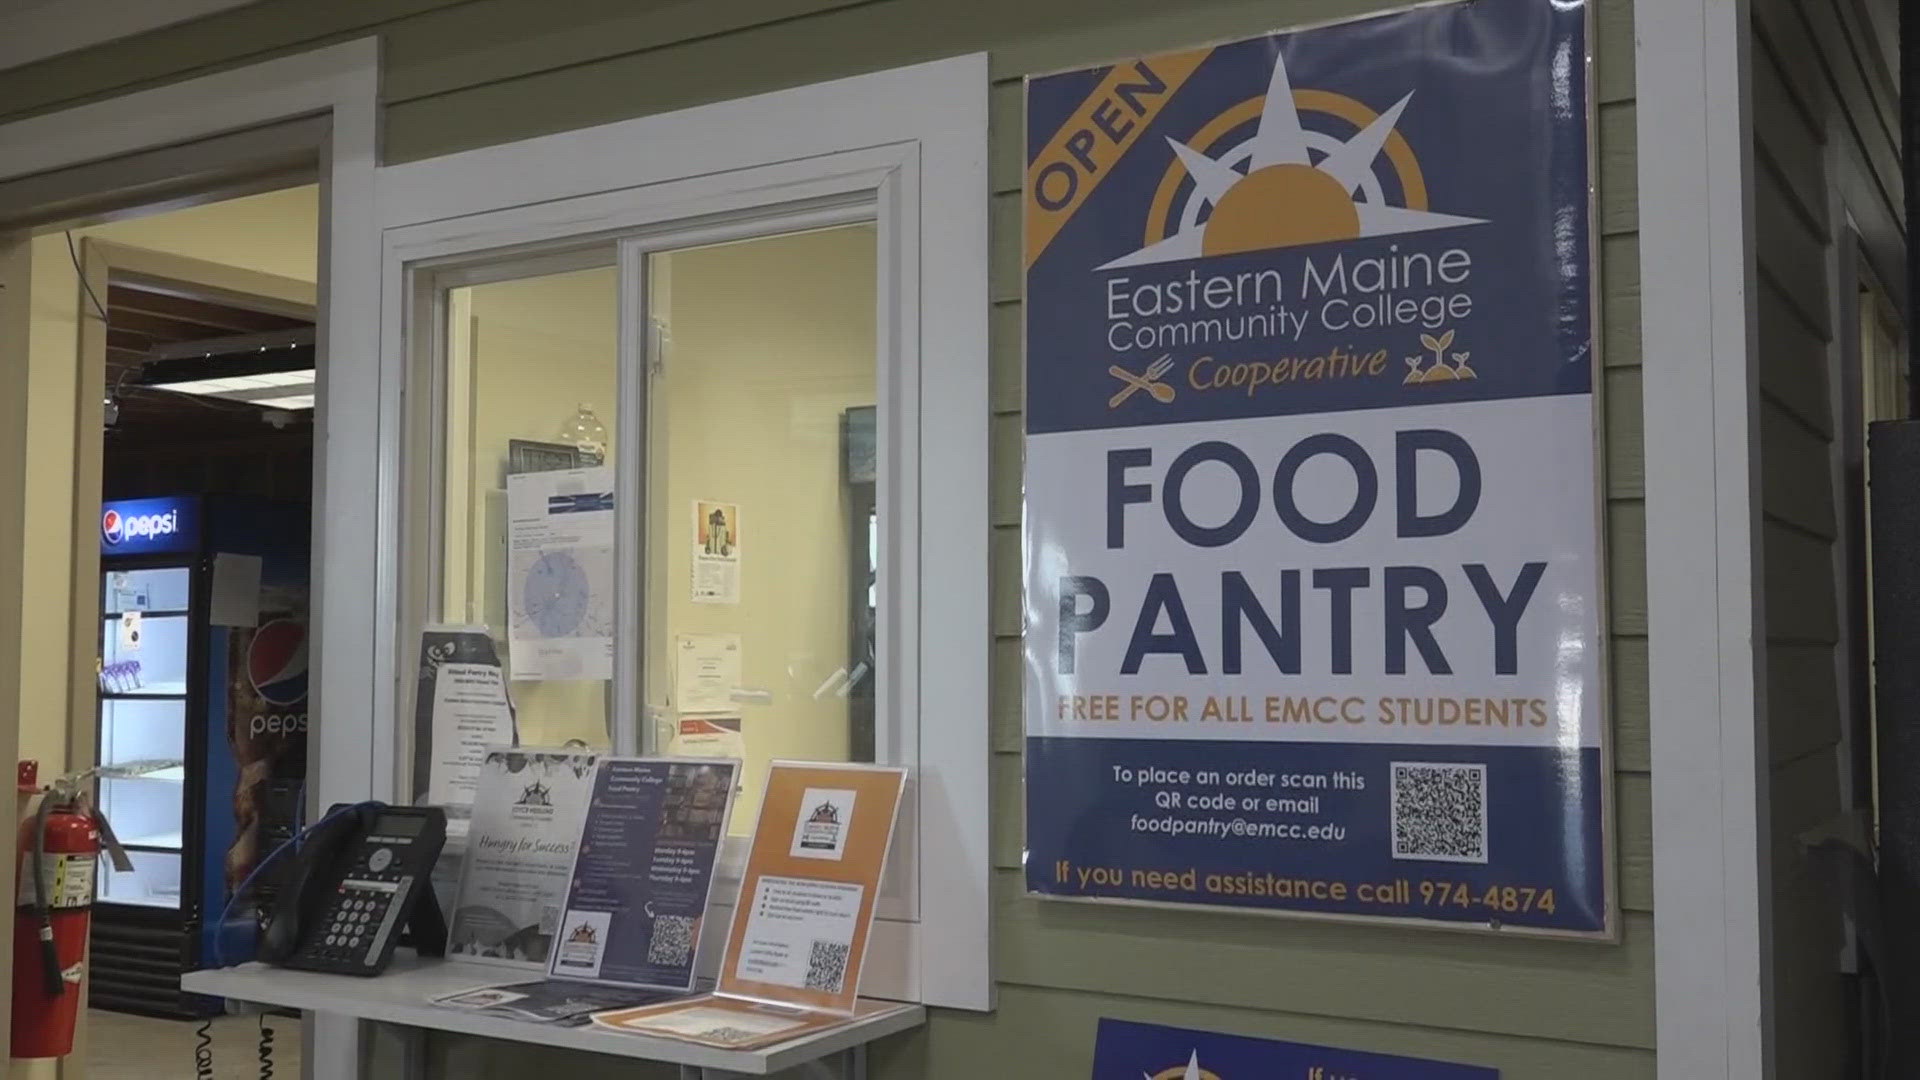 A quarter of EMCC students use the college's food pantry and staff encourage more to use it.